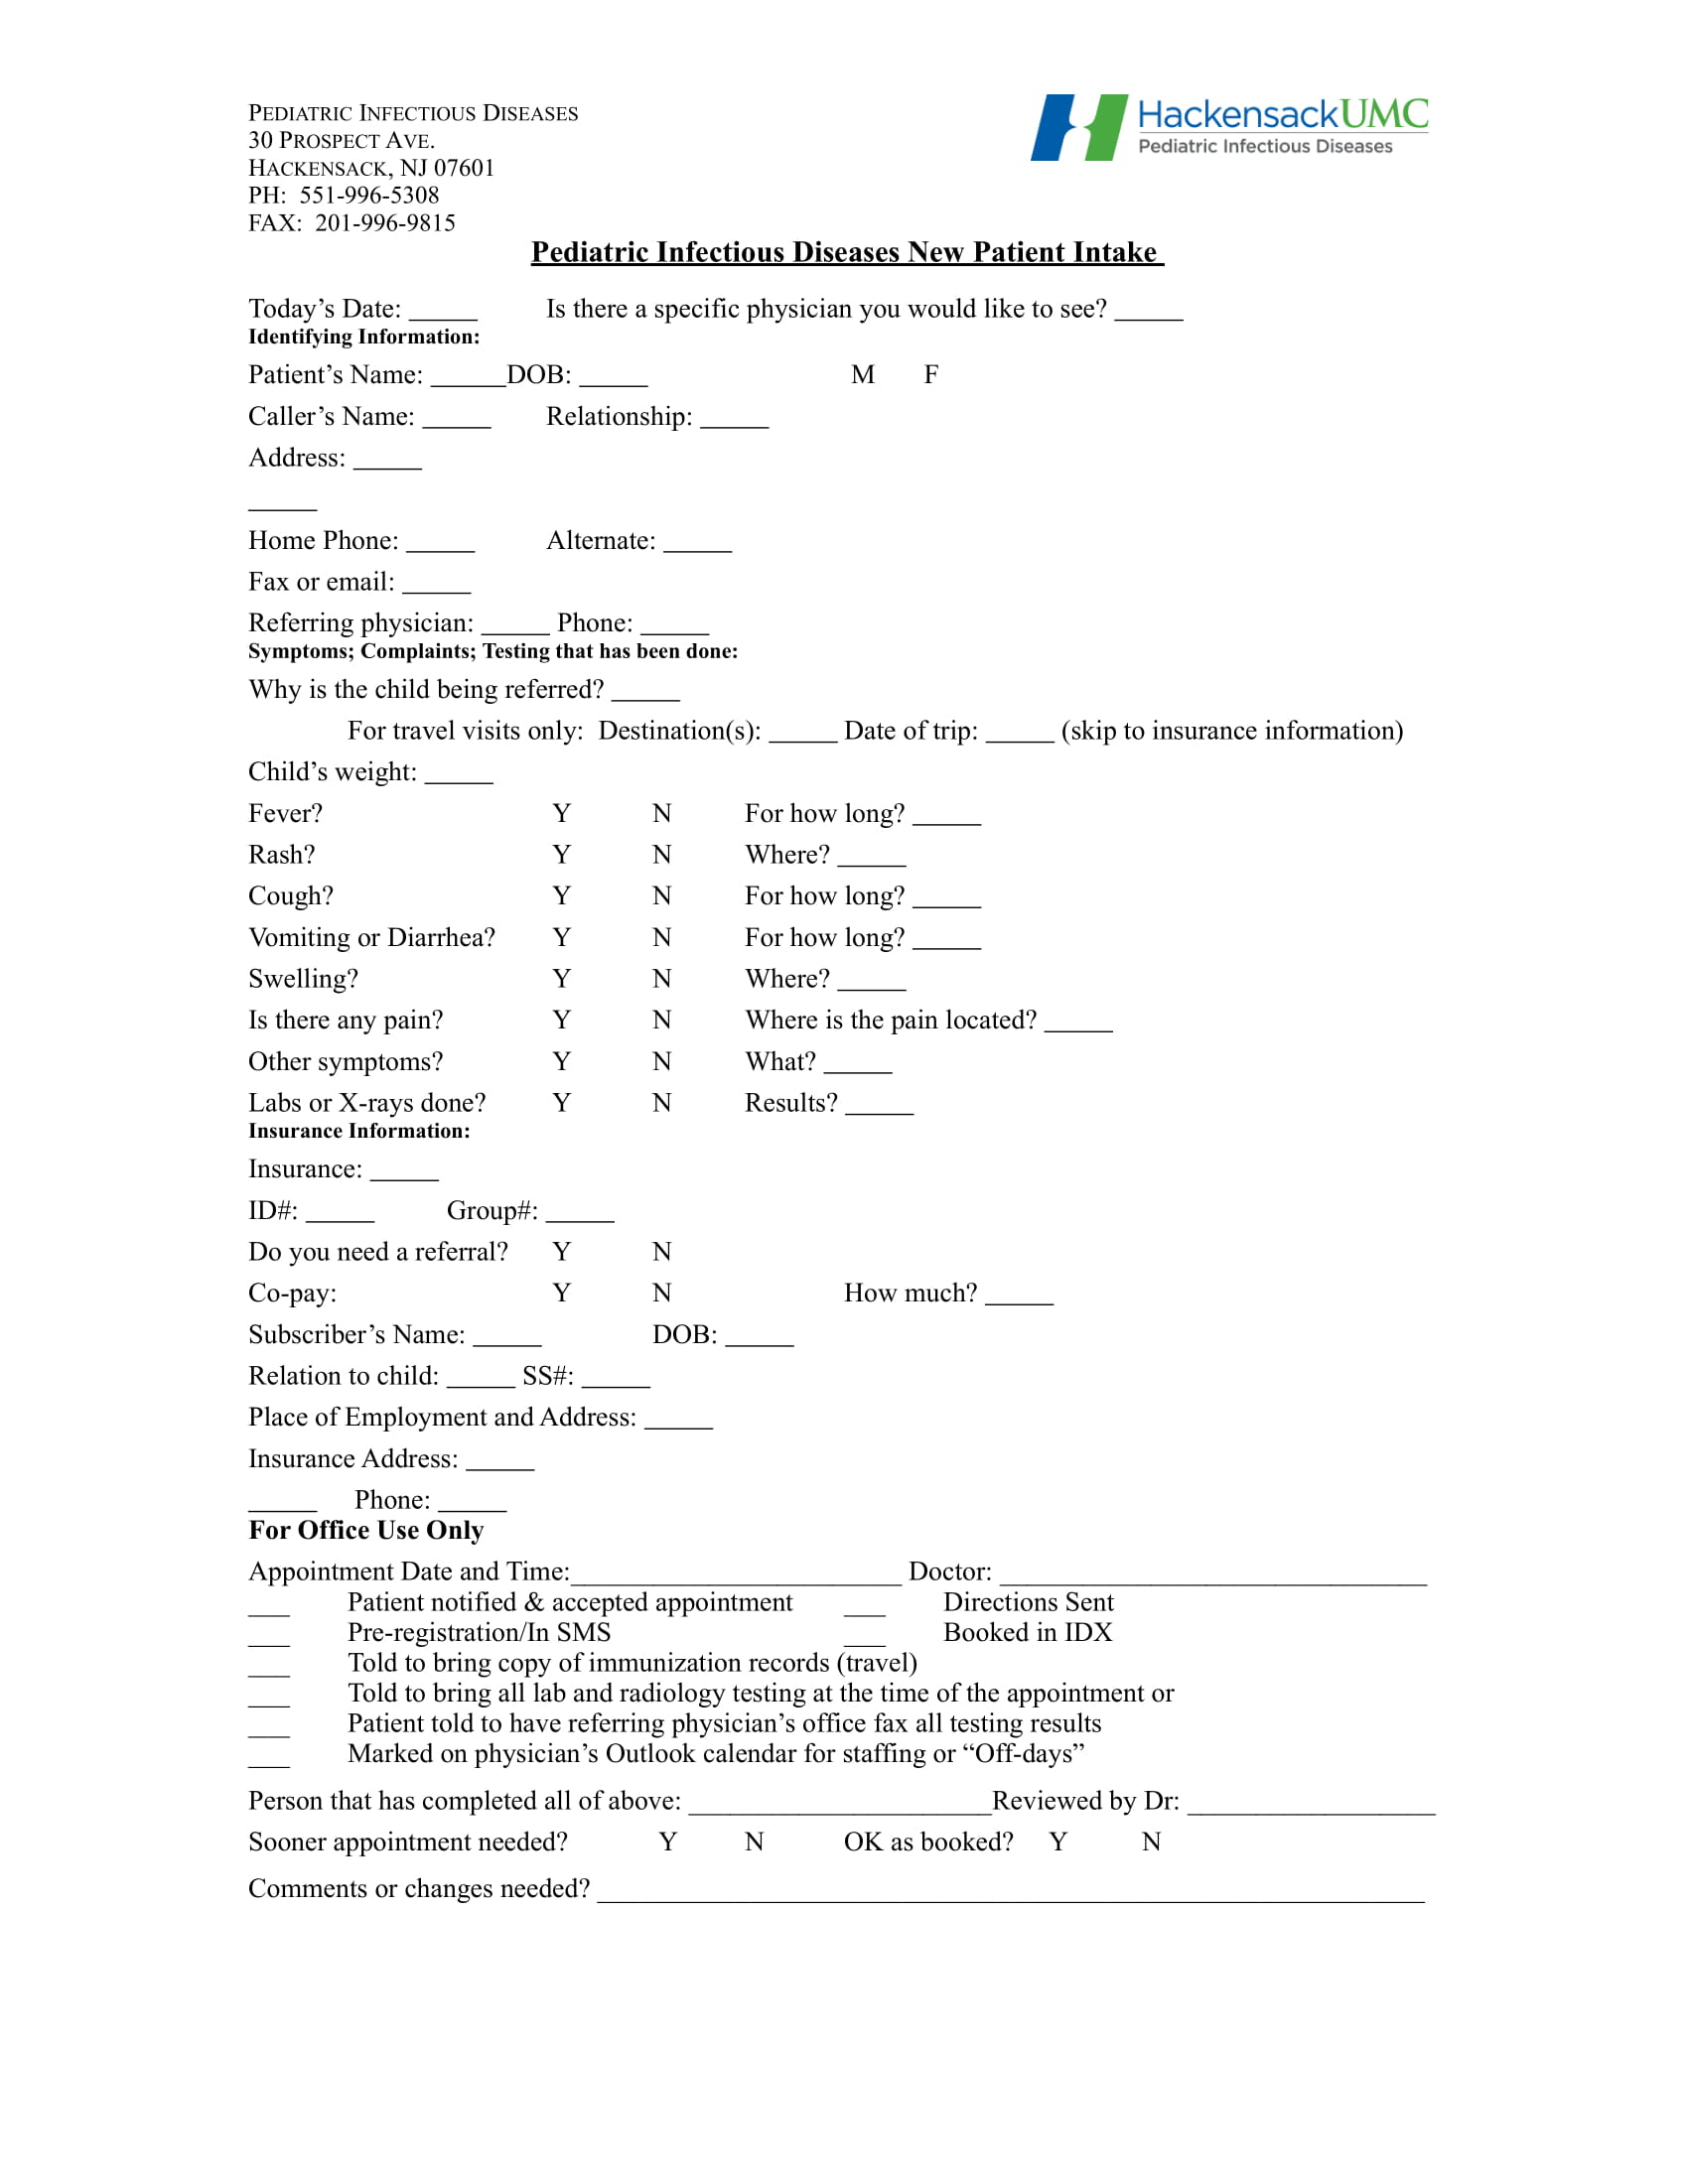 pediatric infectious diseases patient intake form 1